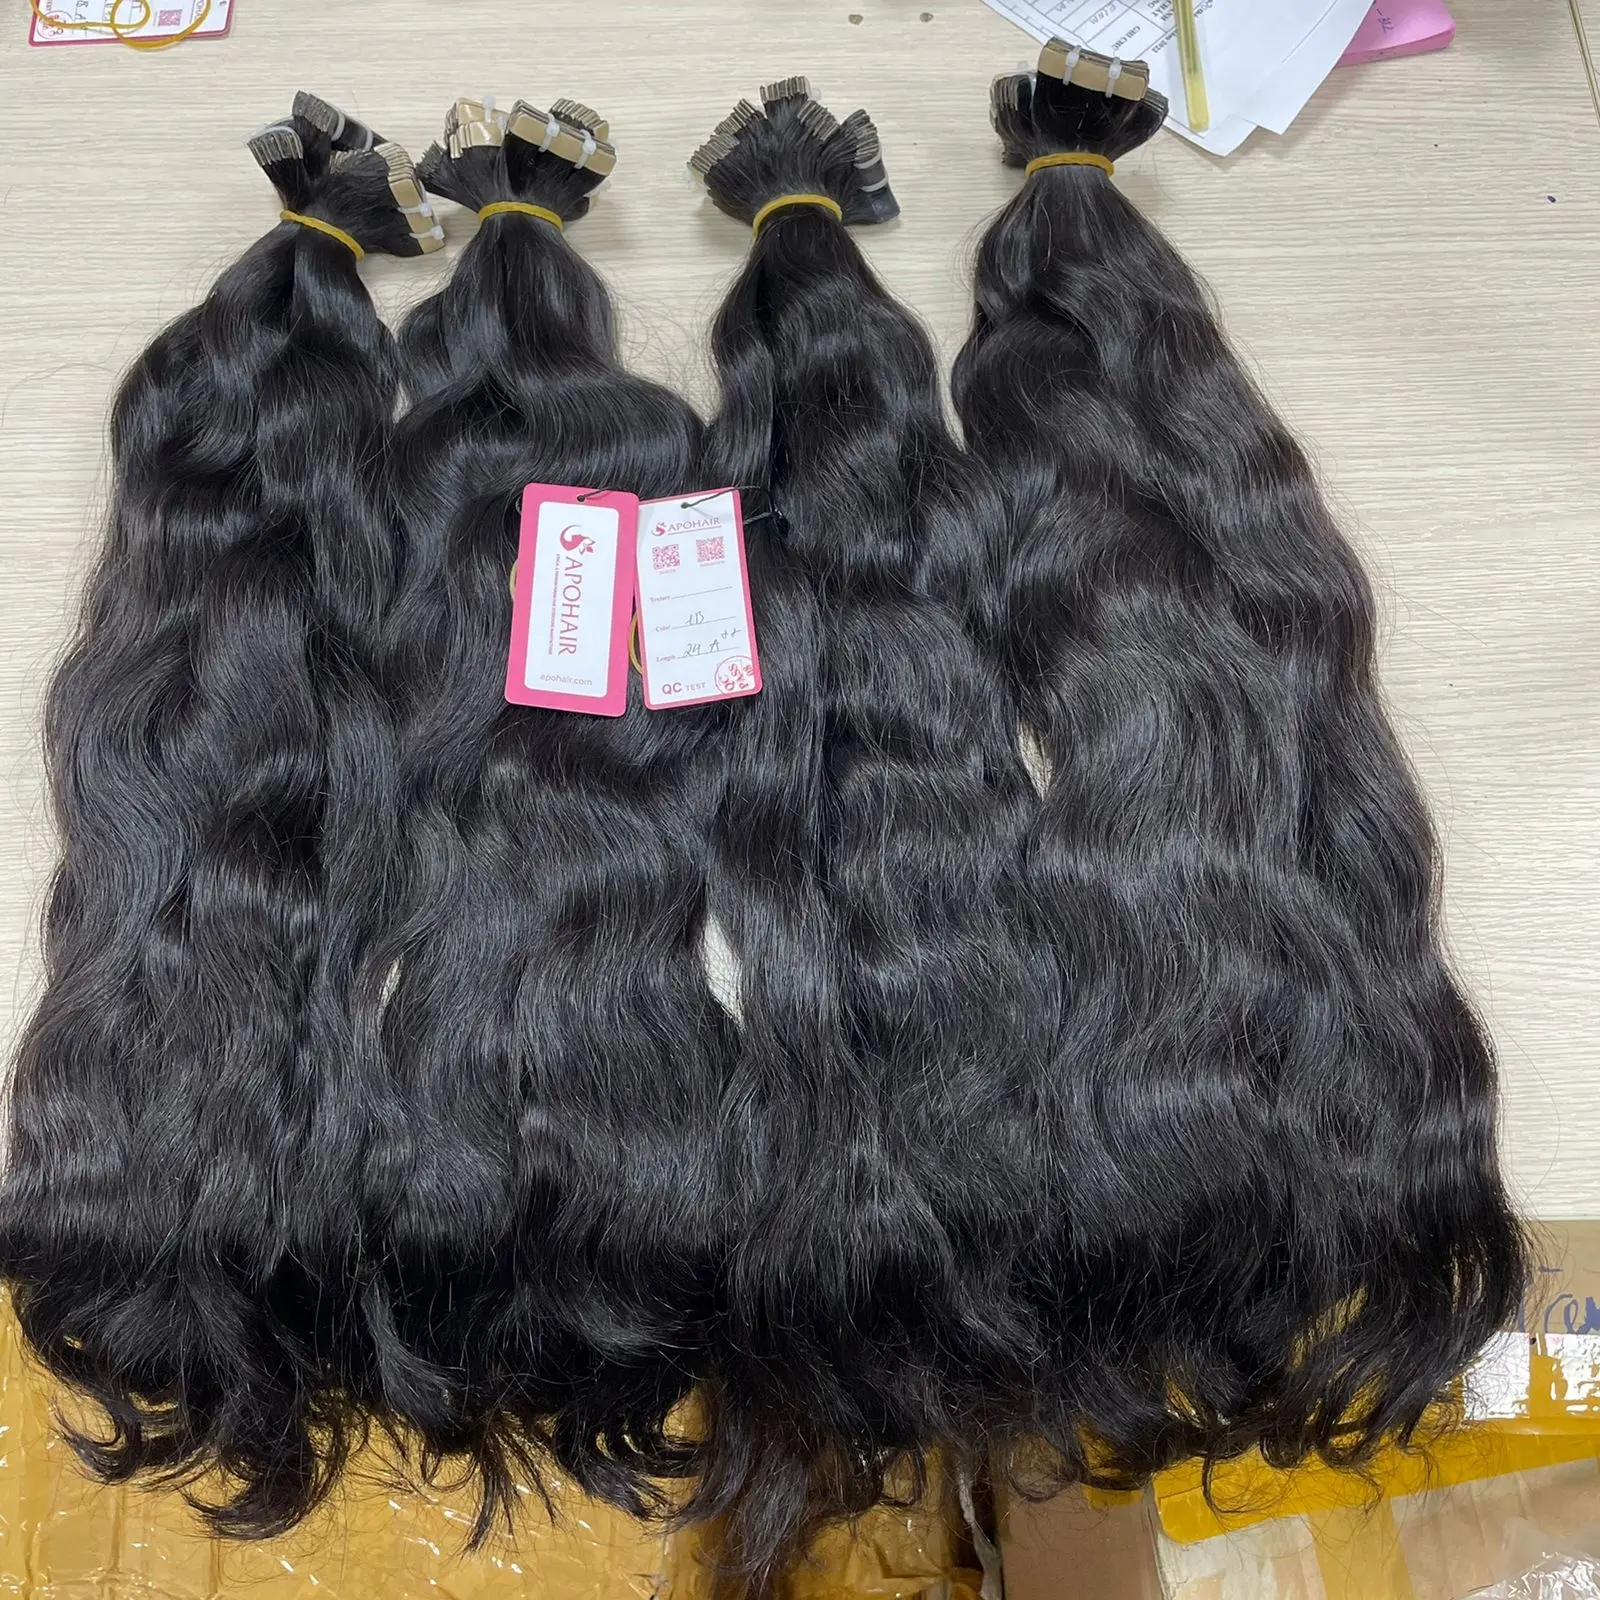 THE BEST QUALITY TAPE NATURAL WAVY HAIR BLACK COLORS AND NO TANGLE NO SHEDDING FROM TIANA APOHAIR